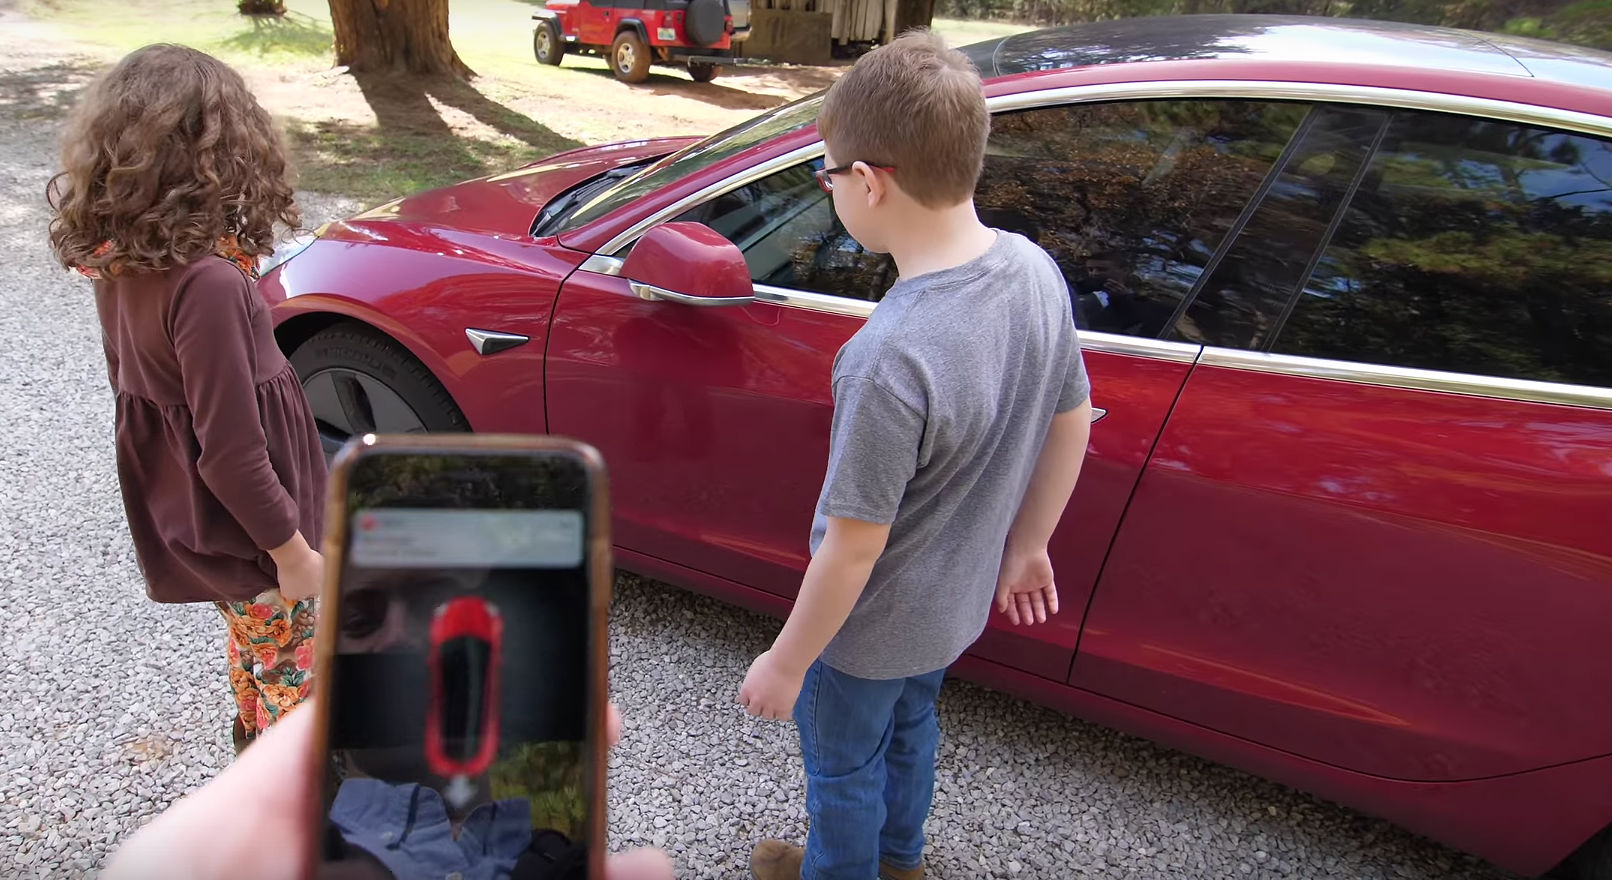 Tesla Model 3 reaction video highlights the excitement of first EV experiences